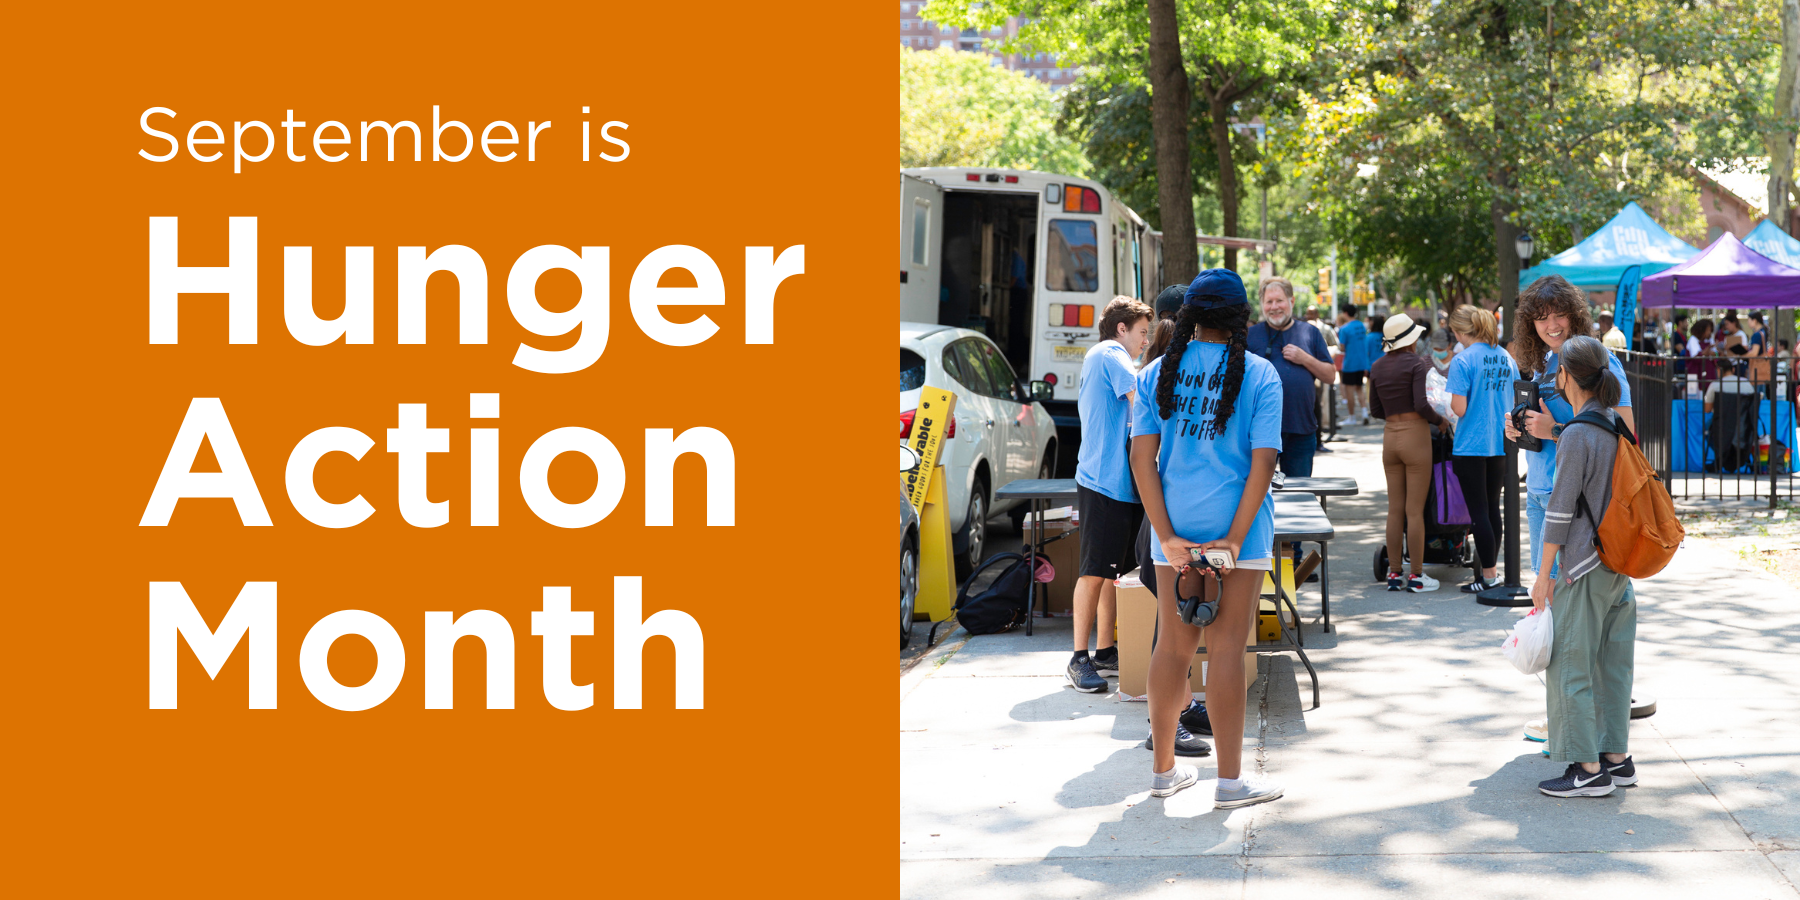 We Celebrate Hunger Action Month